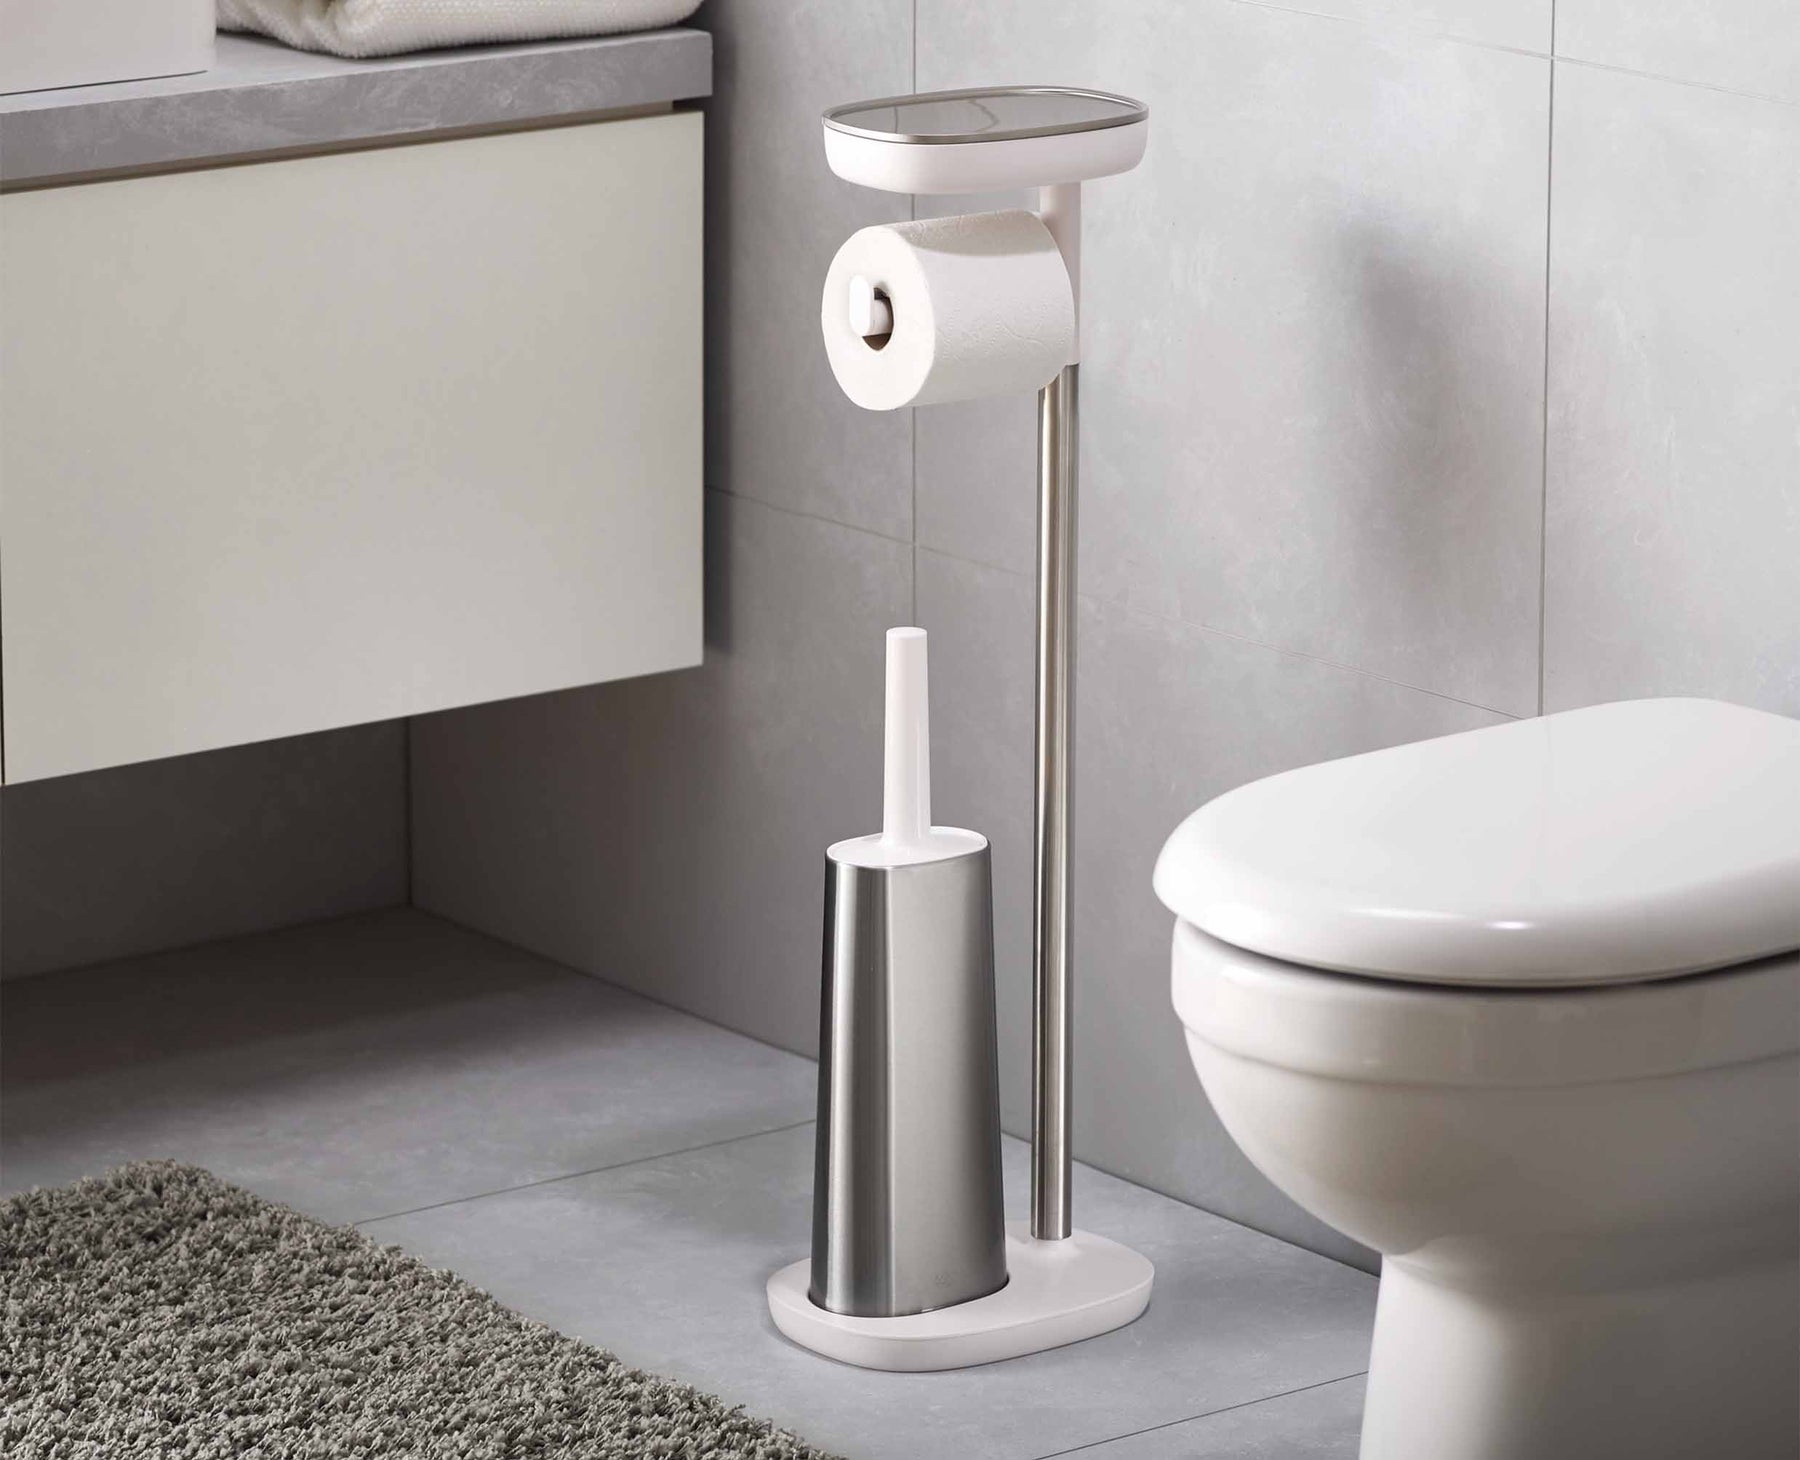 EasyStore™ Plus Toilet Paper Holder with Flex™ Steel Toilet Brush - 70519 - Image 3